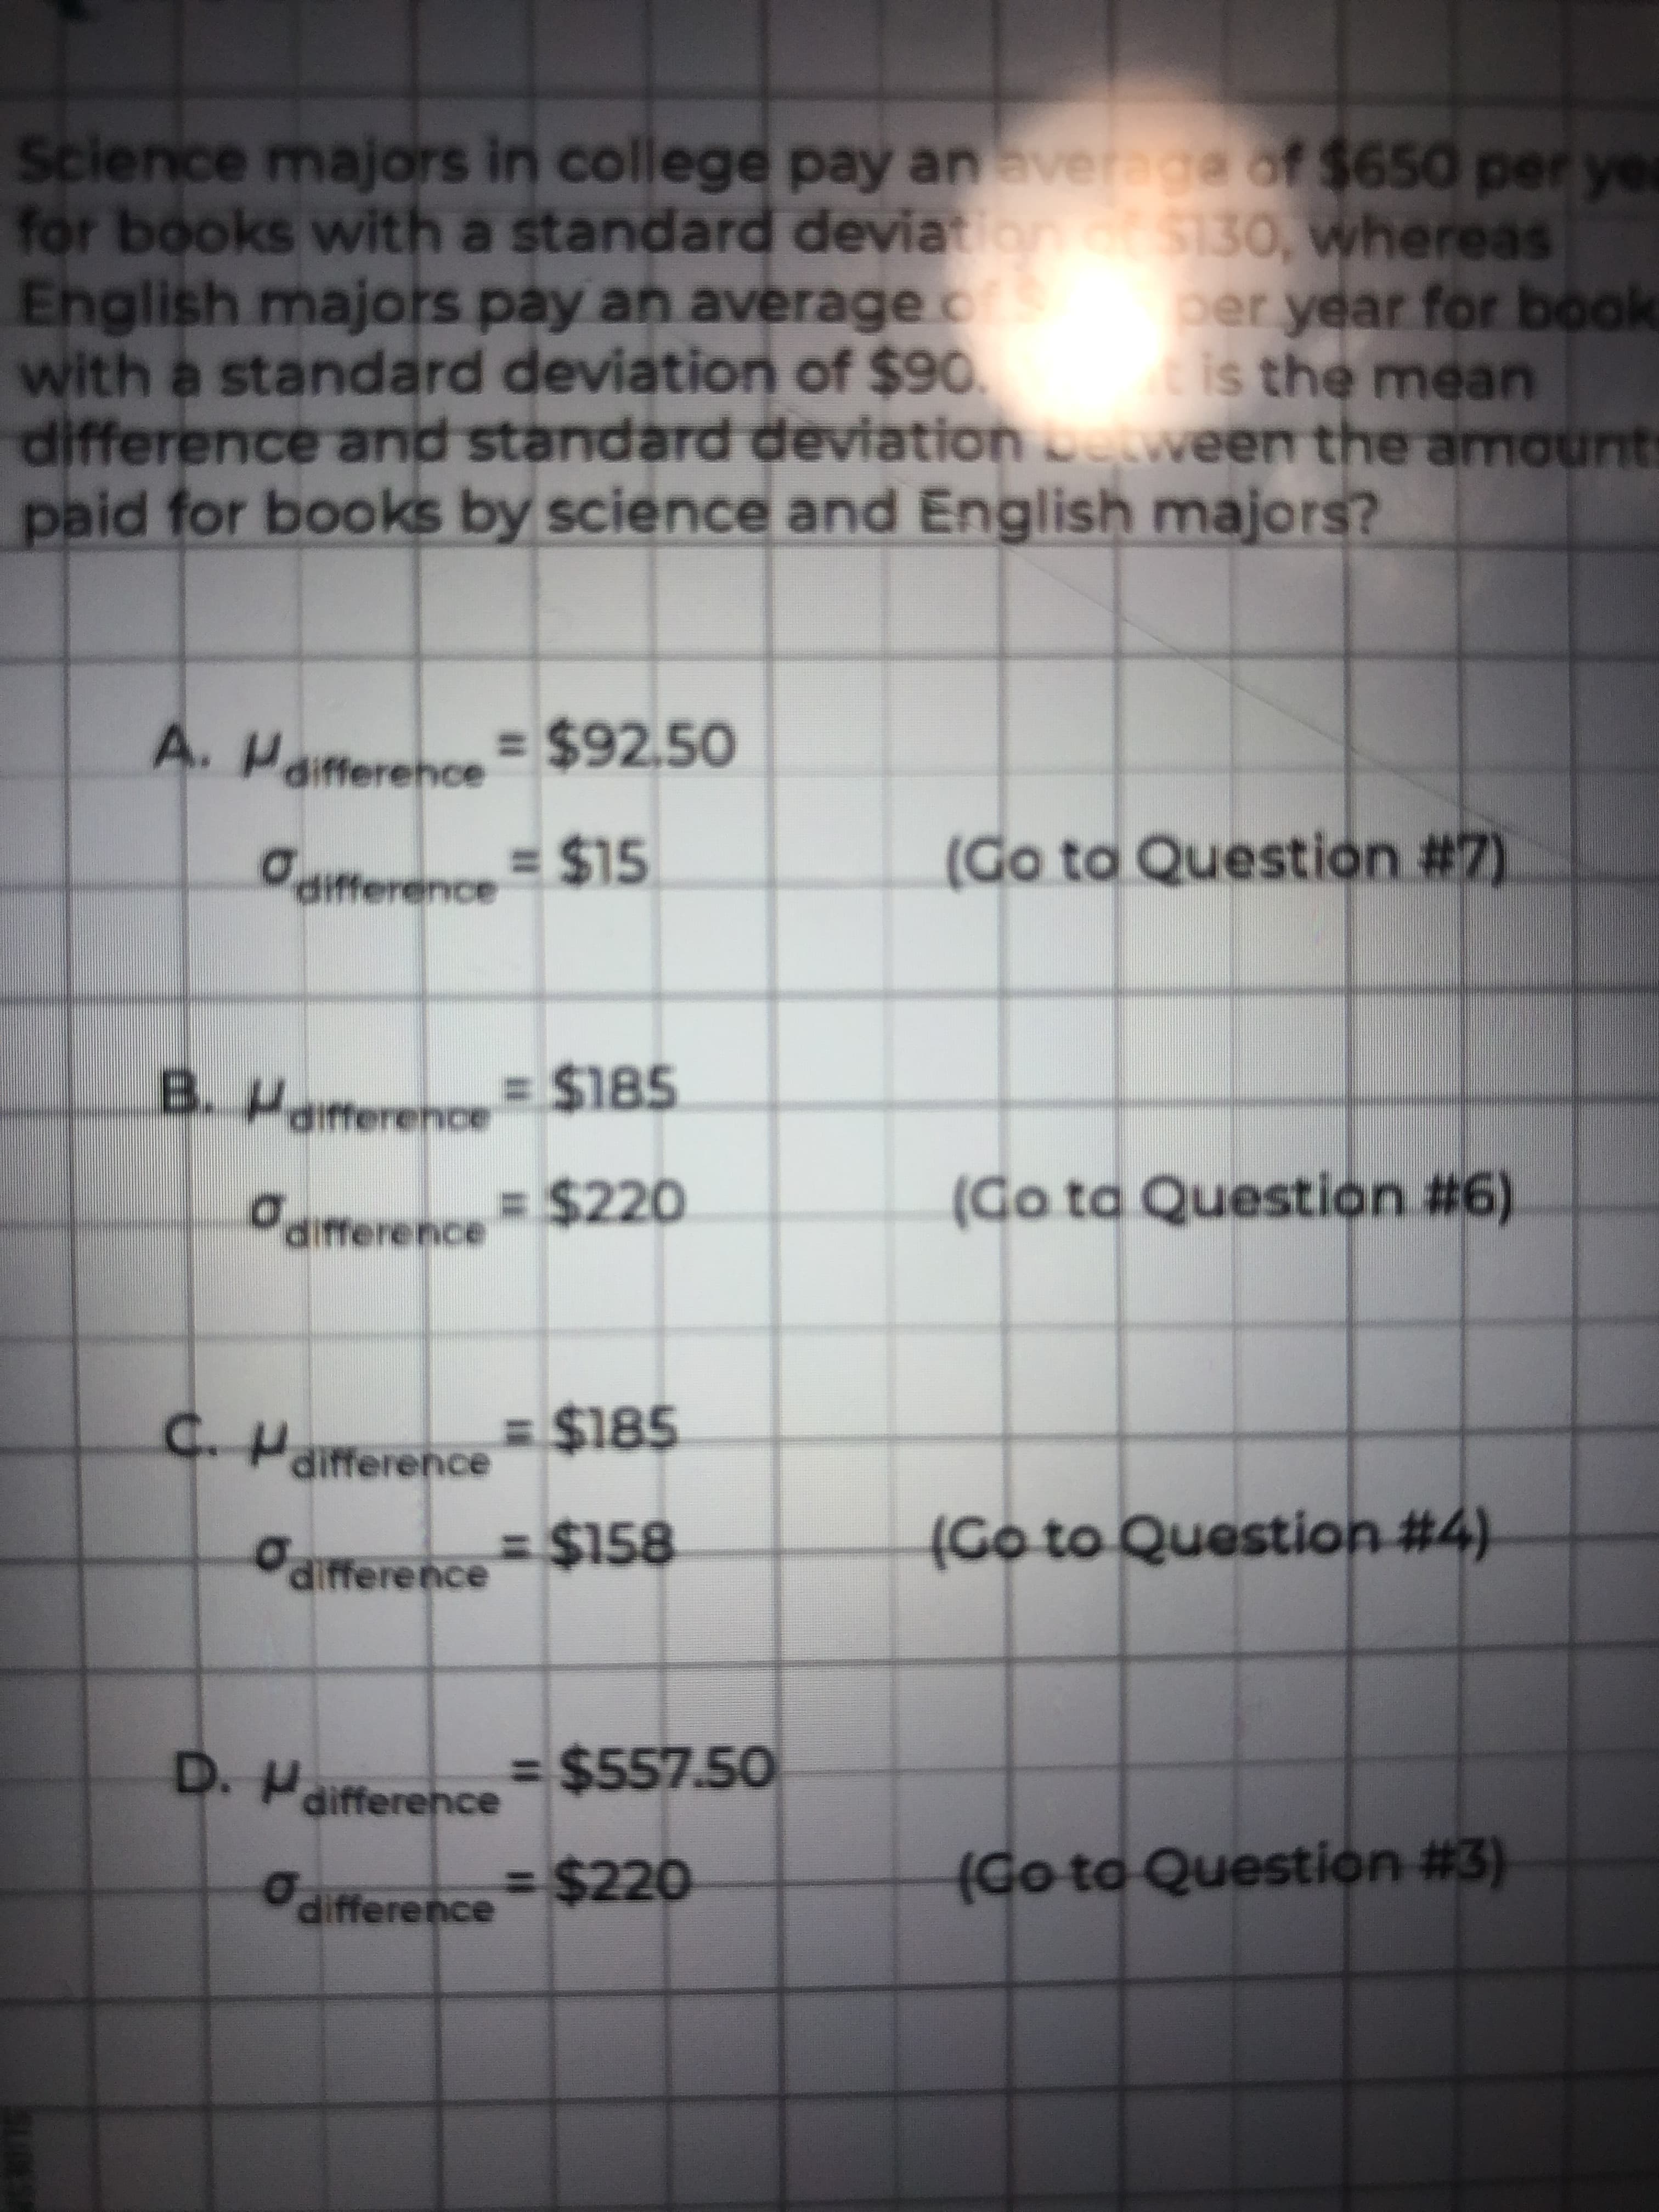 Science majors in college pay anaveraga of $650 per yea
for books with a standard deviation S130, whereas
English majors pay an average os
with a standard deviation of $90
difference and standard deviationetween the amounts
paid for books by science and English majors?
per year for book
is the mean
A. H
7. Paifference = $92,50
differehce
%2415
difference
(Go ta Question #7)
BPairterence= $185
dmerence$220
%3 %$4220
(Go ta Question #6)
C.Haitference
= $185
%3D%24158
(Go to Question #4)
aifference
D. Paifference
%3D%$4557.50
(Go to Question #3)
difference $220
